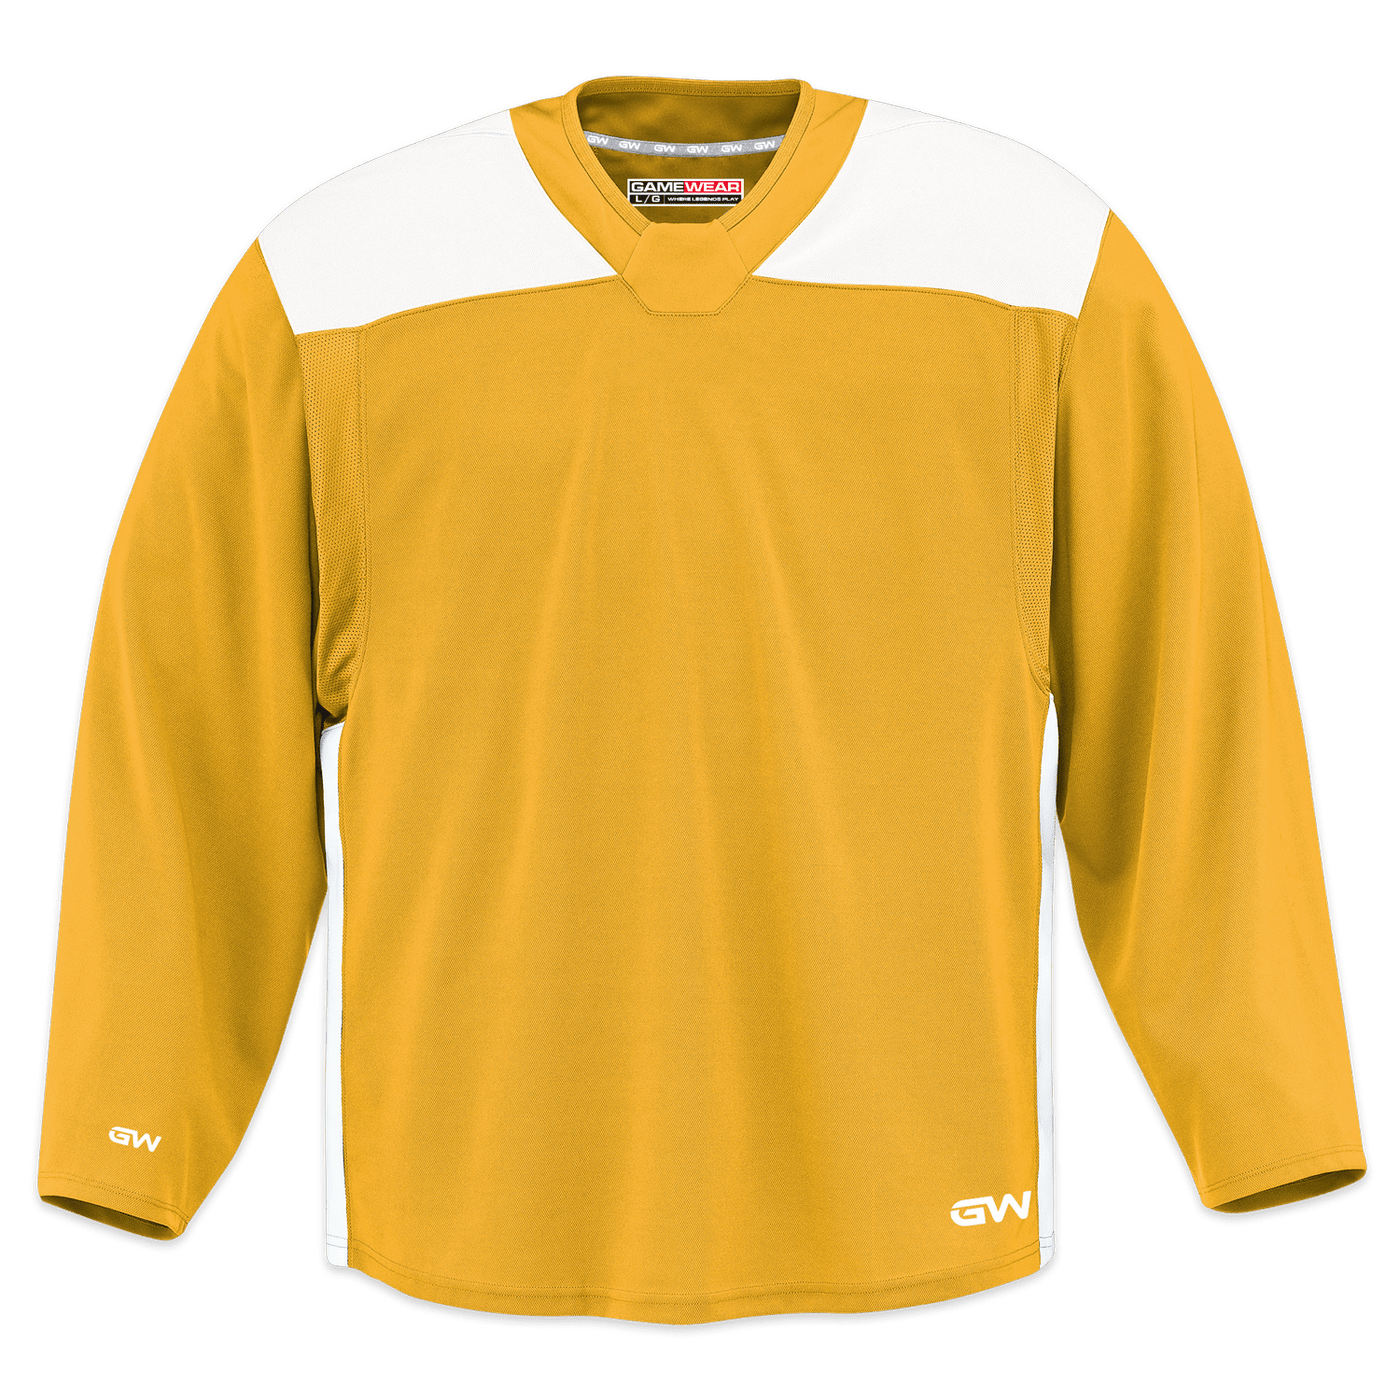 GameWear GW6500 ProLite Series Junior Hockey Practice Jersey - Yellow / White - The Hockey Shop Source For Sports